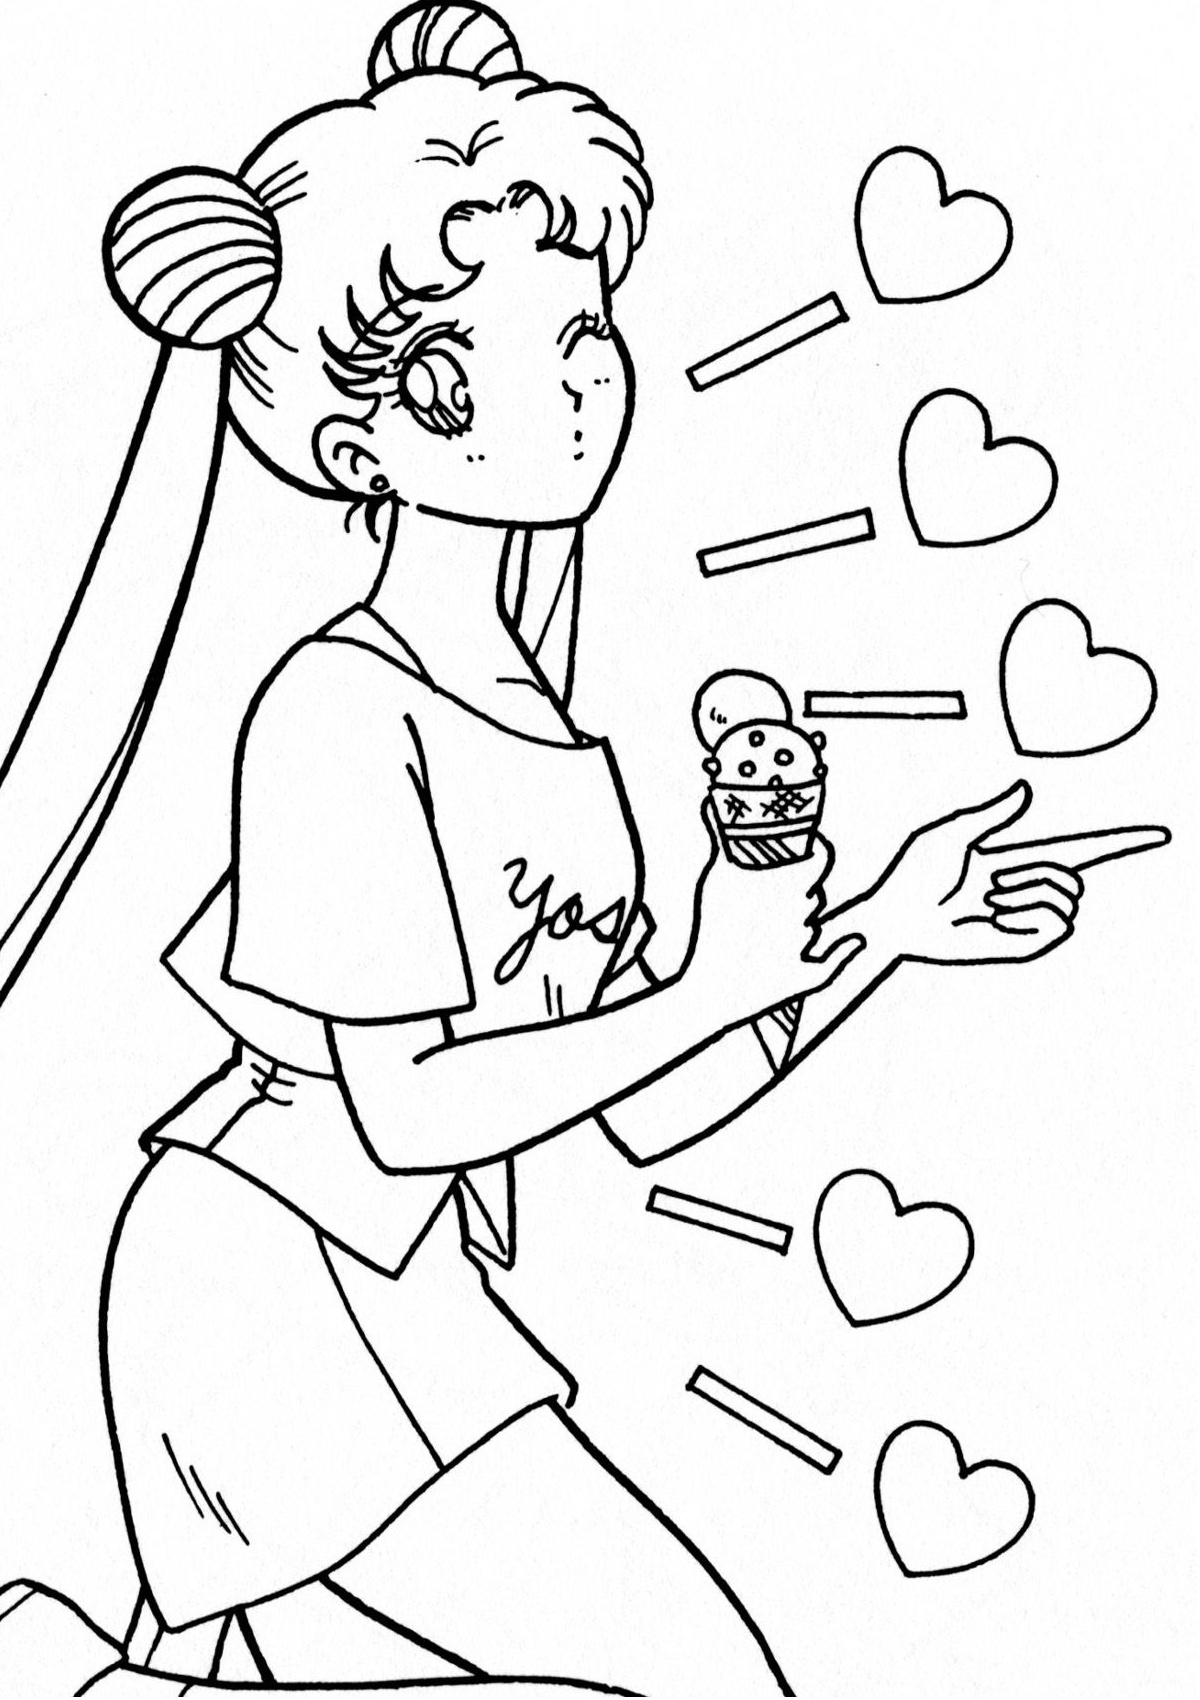 Print and Color Kawaii Sailor Moon with Ice Cream Coloring Pages